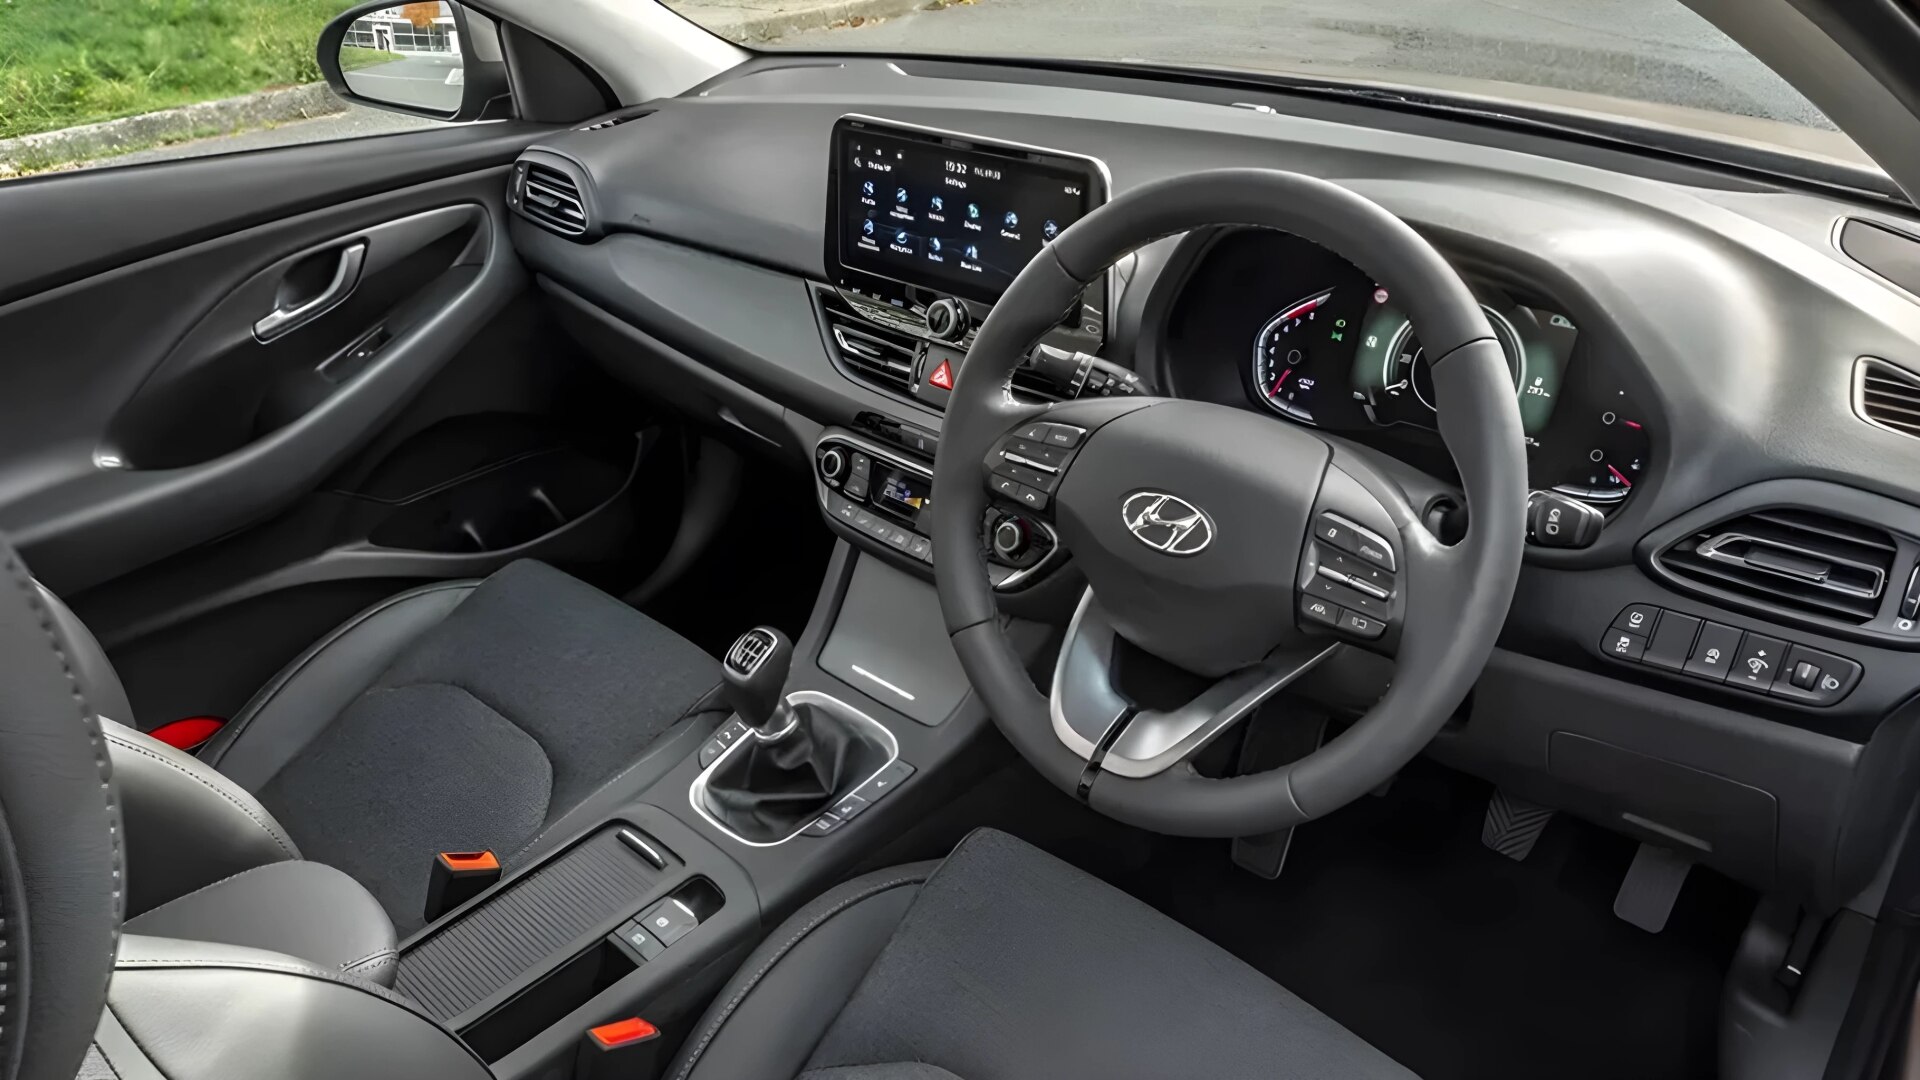 The Interior, Steering, Dashboard, And Central Console Of An Hyundai i30 (Credits TopGear)